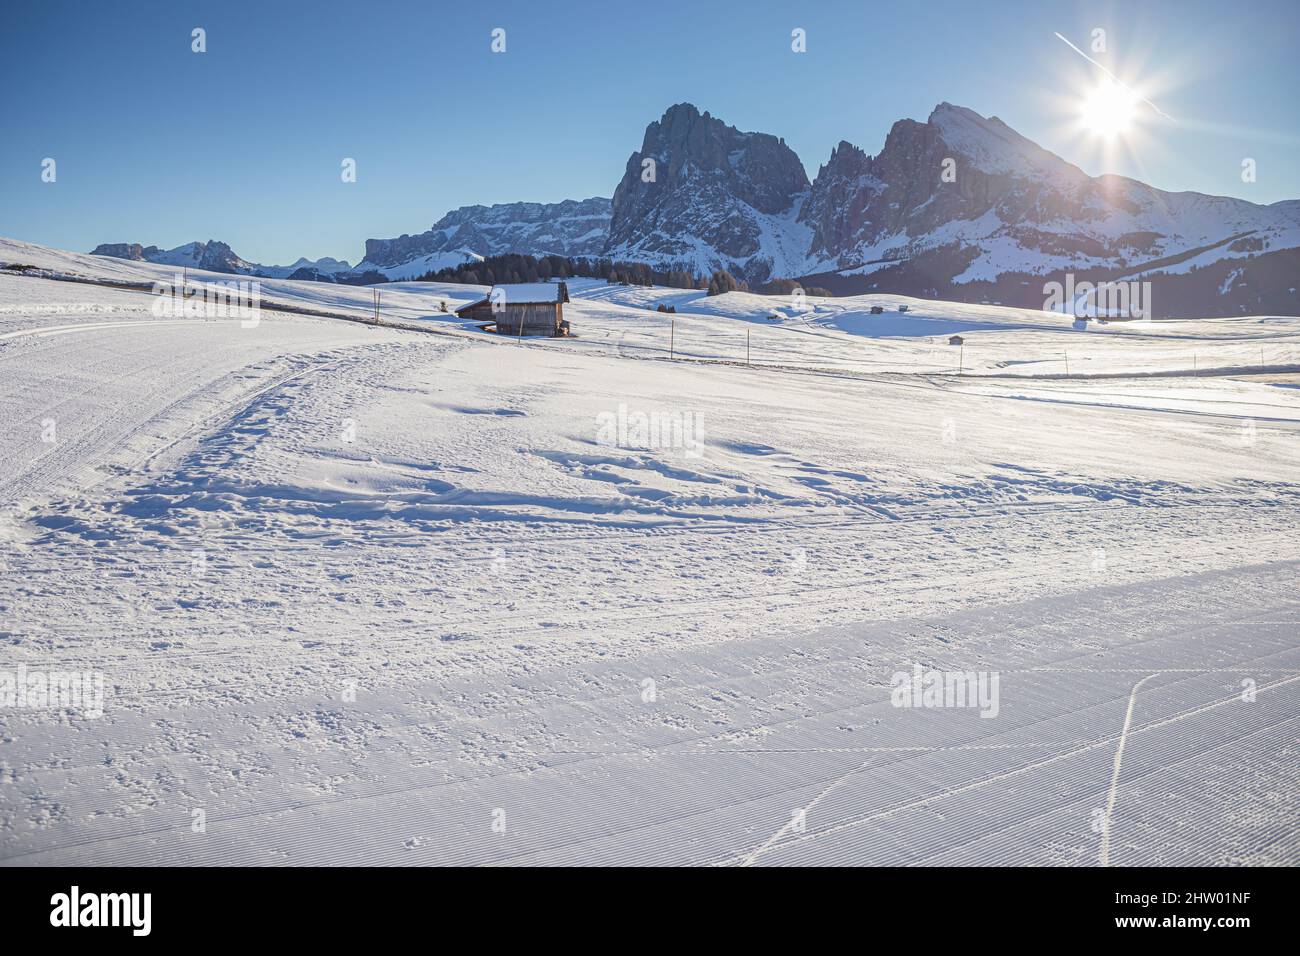 The skiing area Groeden with Seiser Alm, St. Ulrich, St. Christina and Wolkenstein areas in Dolomite Alps, South Tyrol, Italy Stock Photo